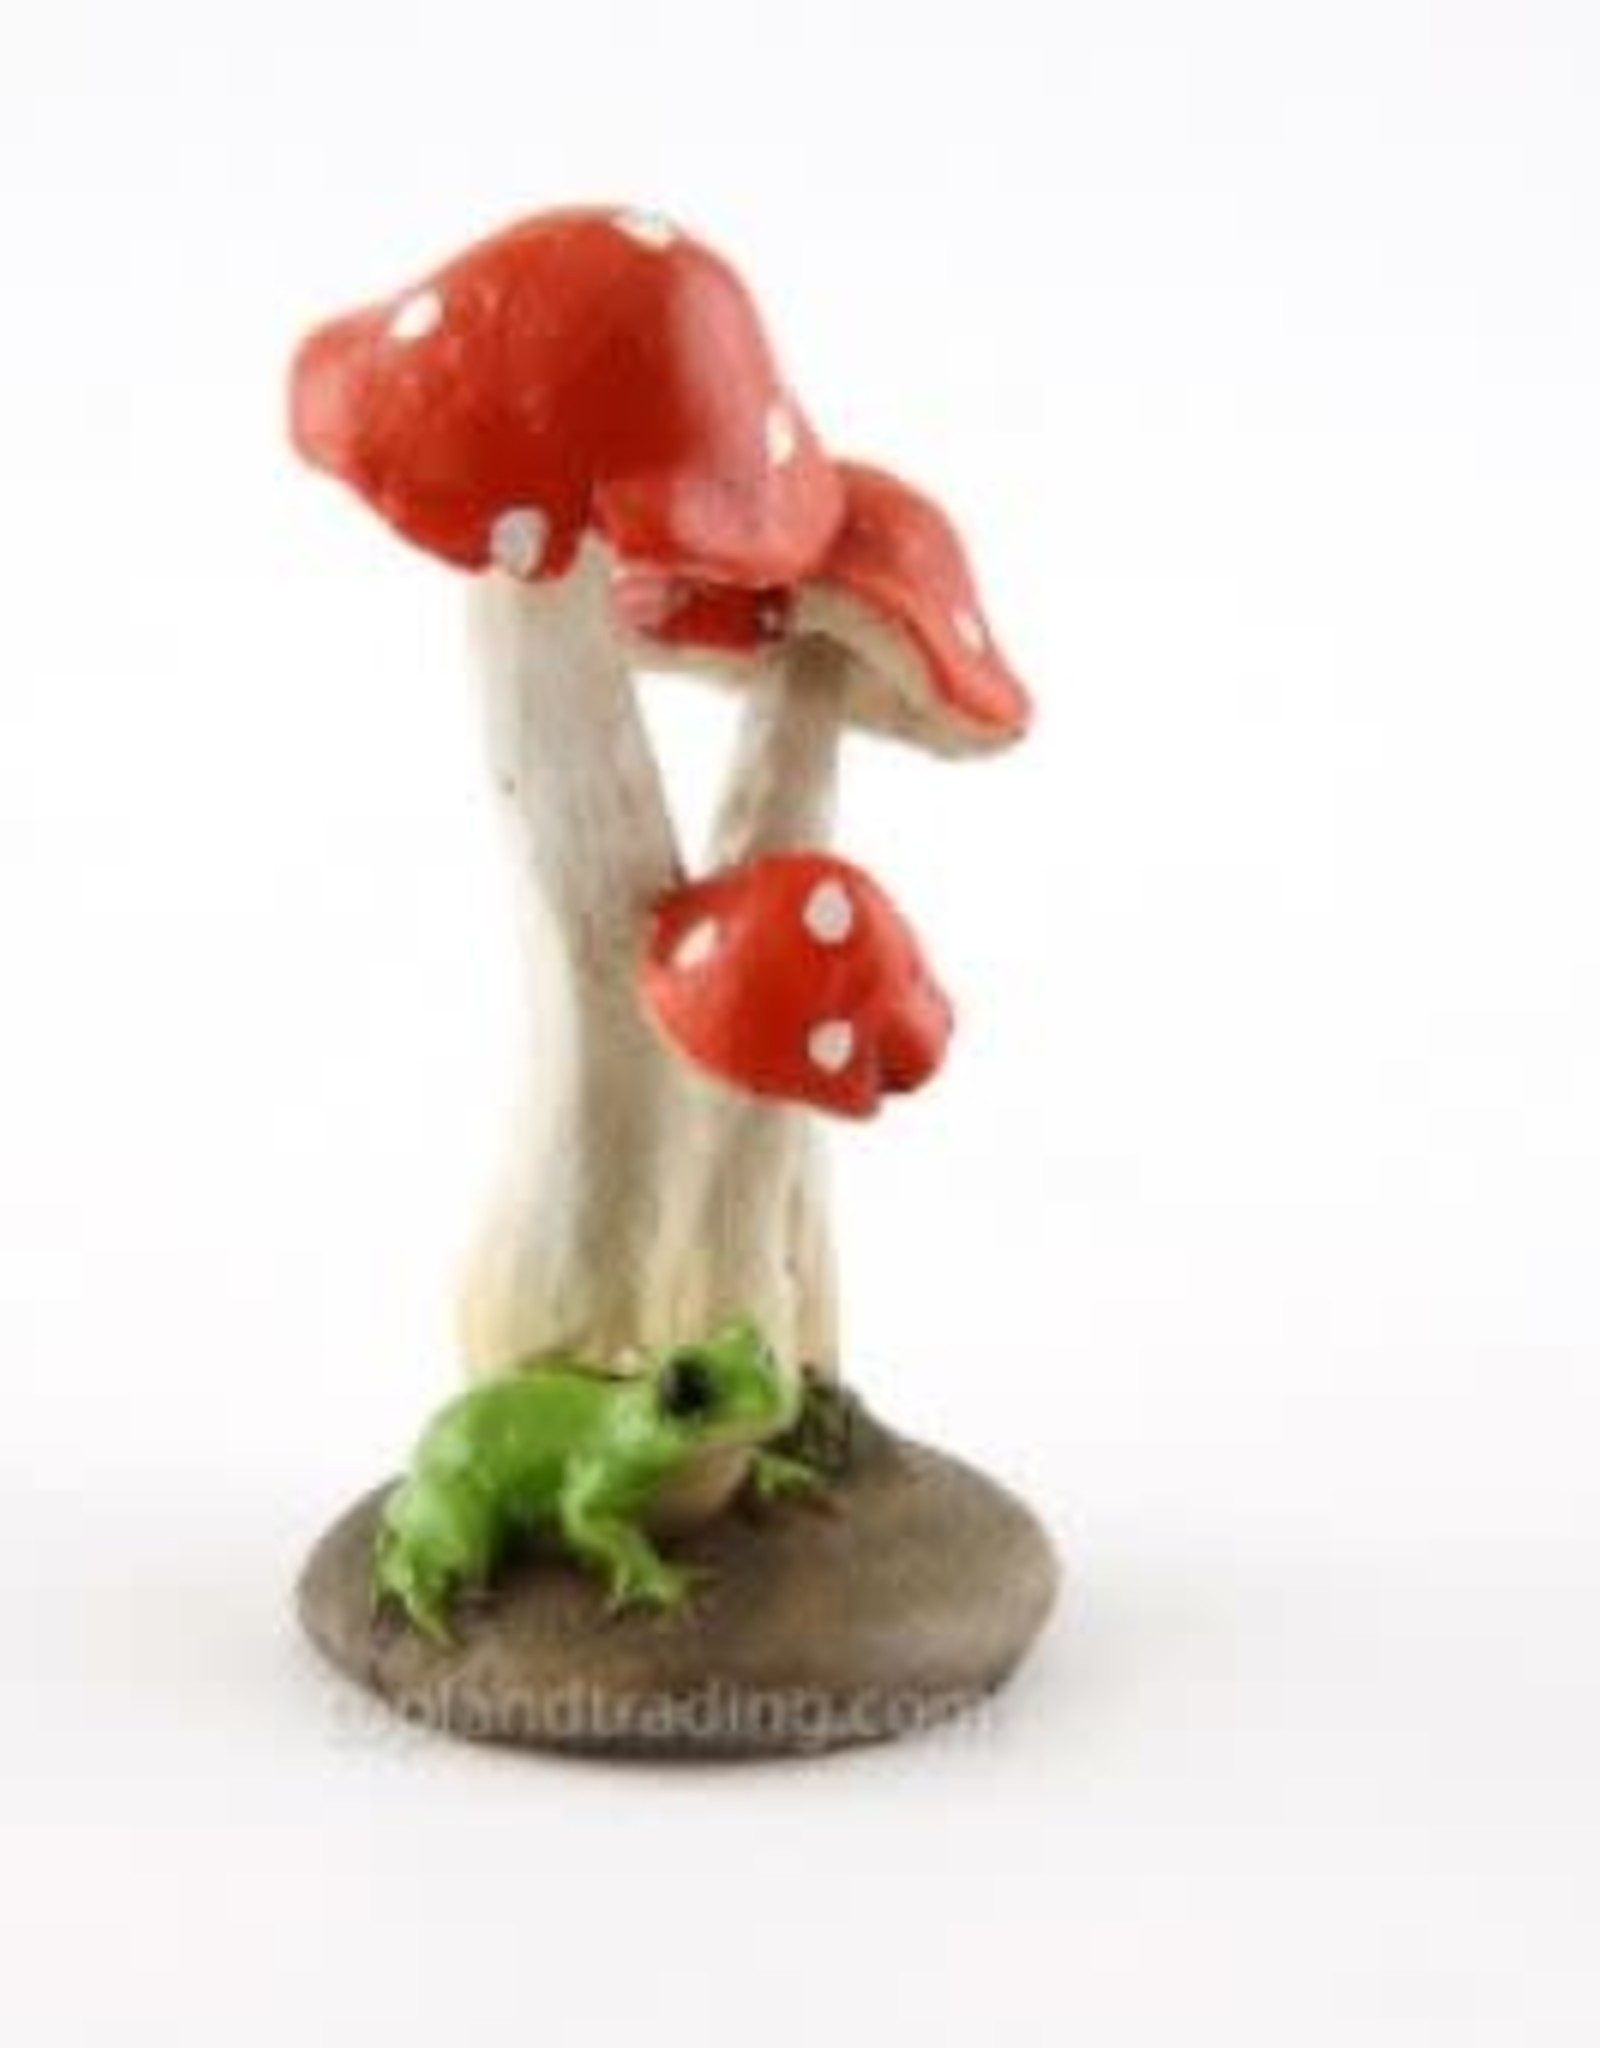 Top Land Trading MINI FROG WITH RED MUSHROOMS